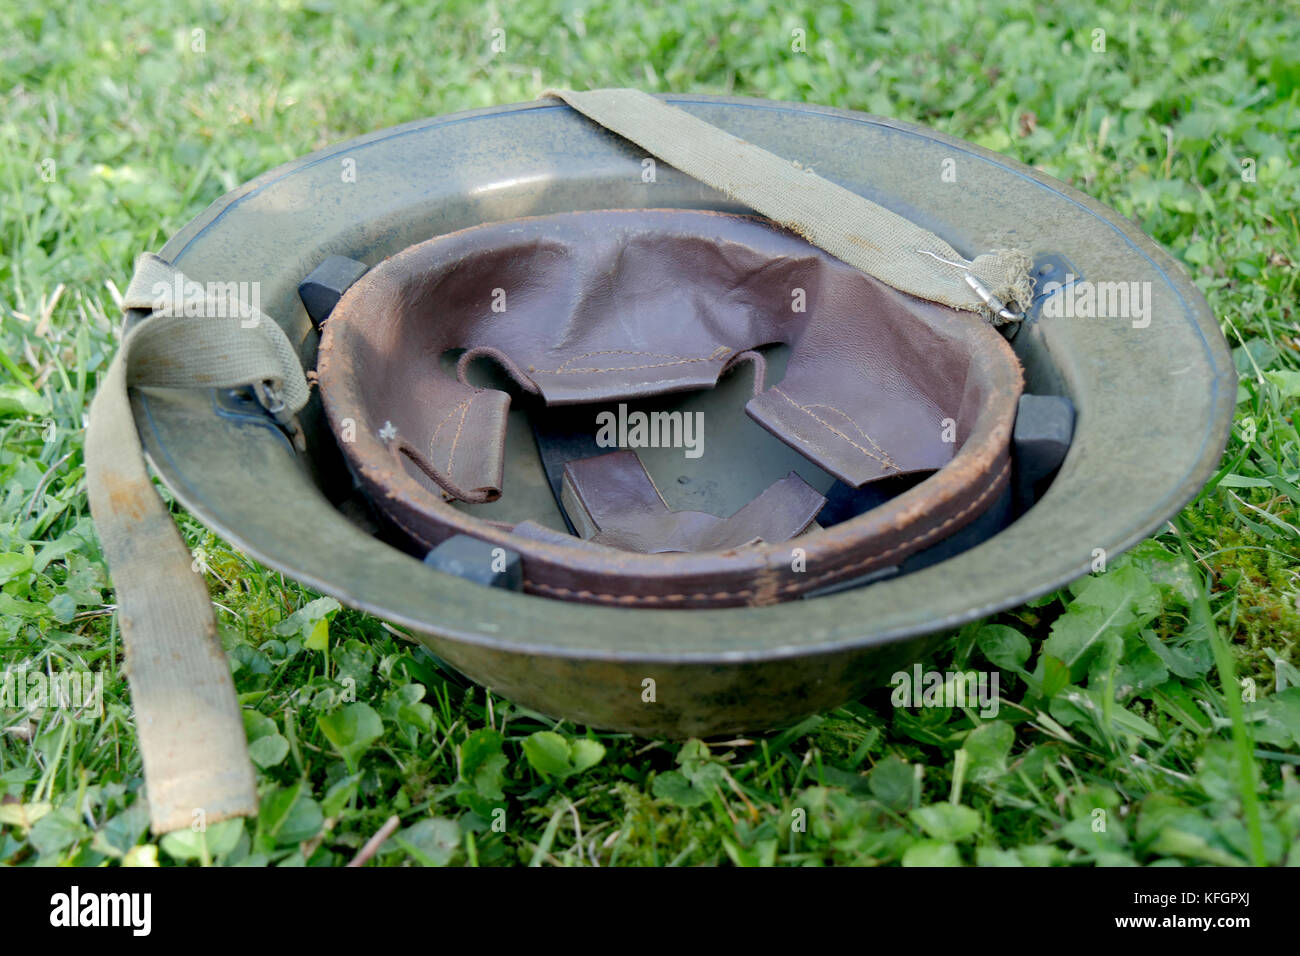 the wwii british helment on the grass Stock Photo